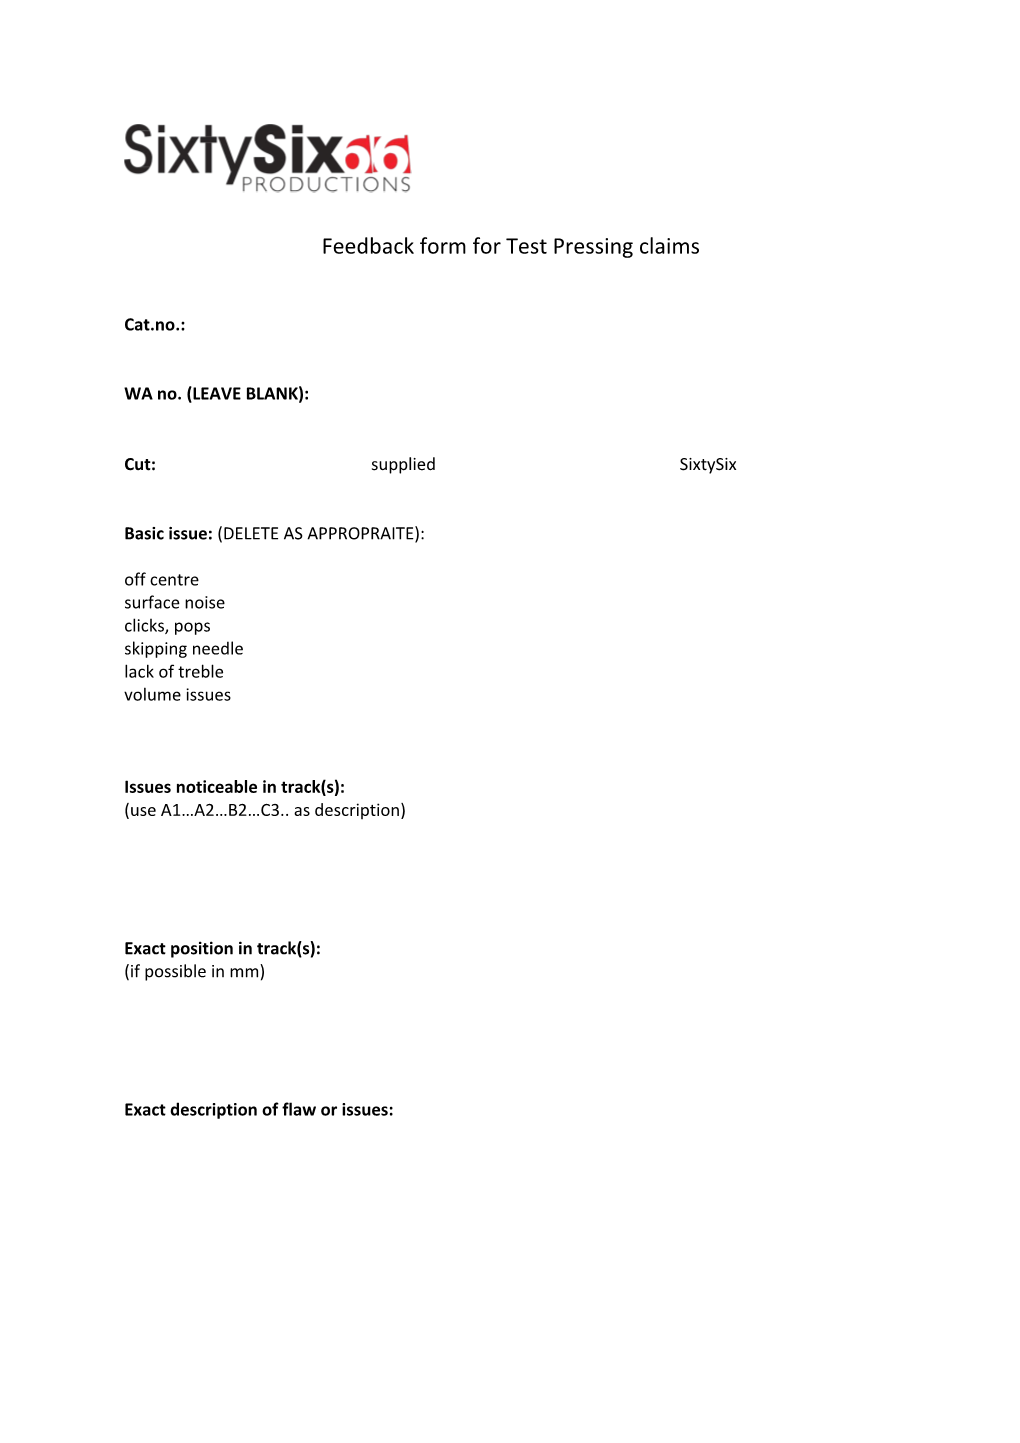 Feedback Form for Test Pressing Claims